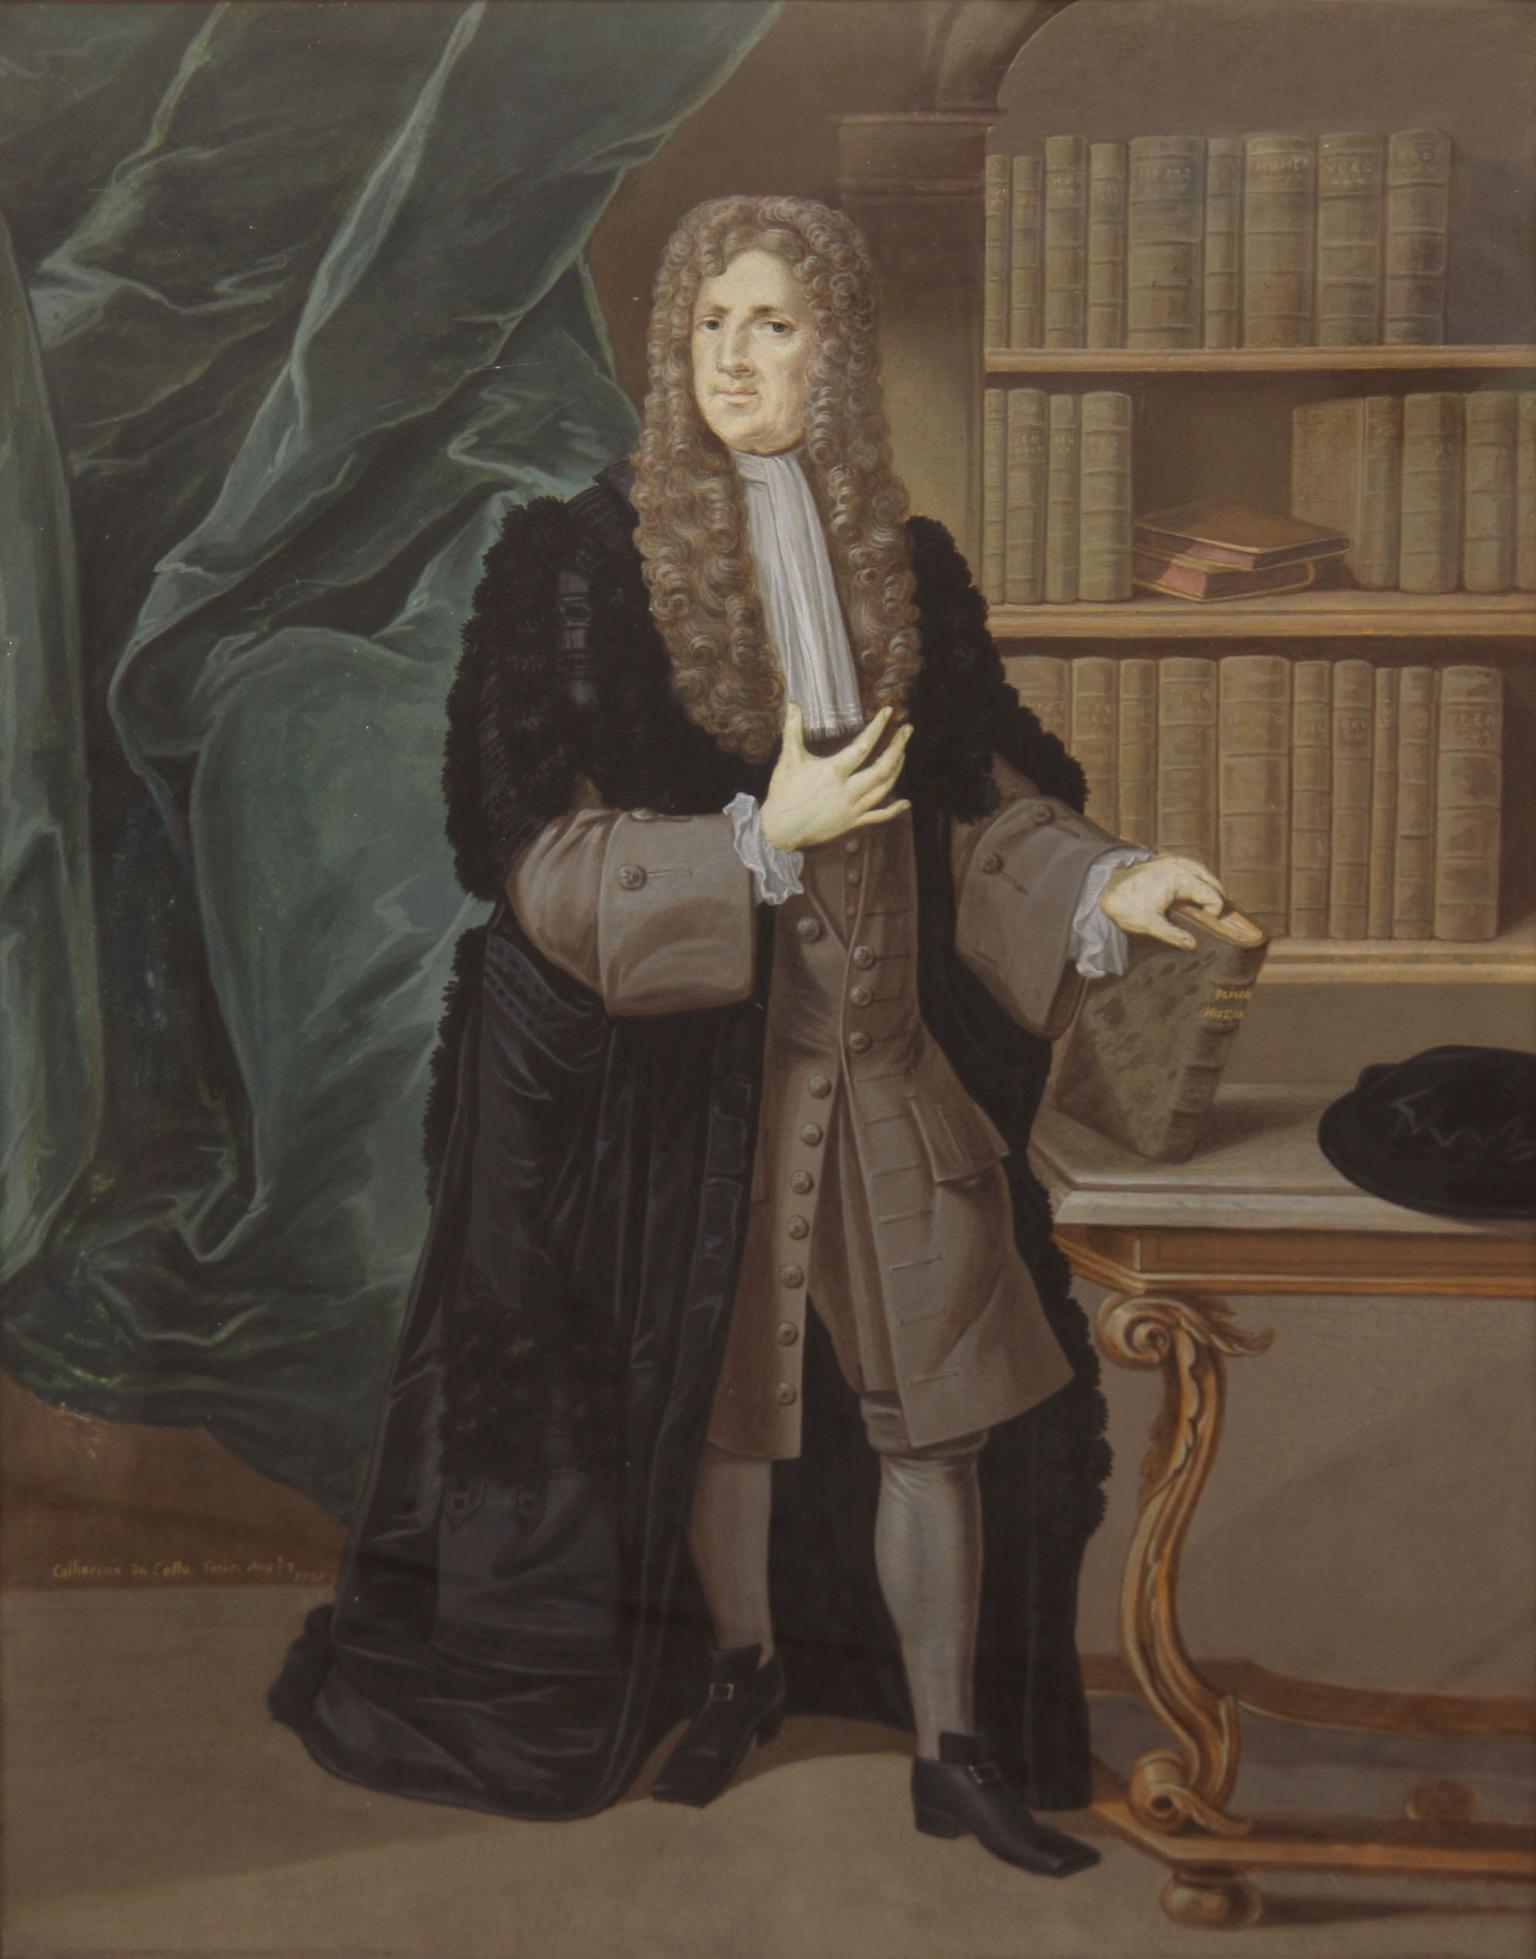 Full-body portrait painting of man wearing periwig and holding a book.